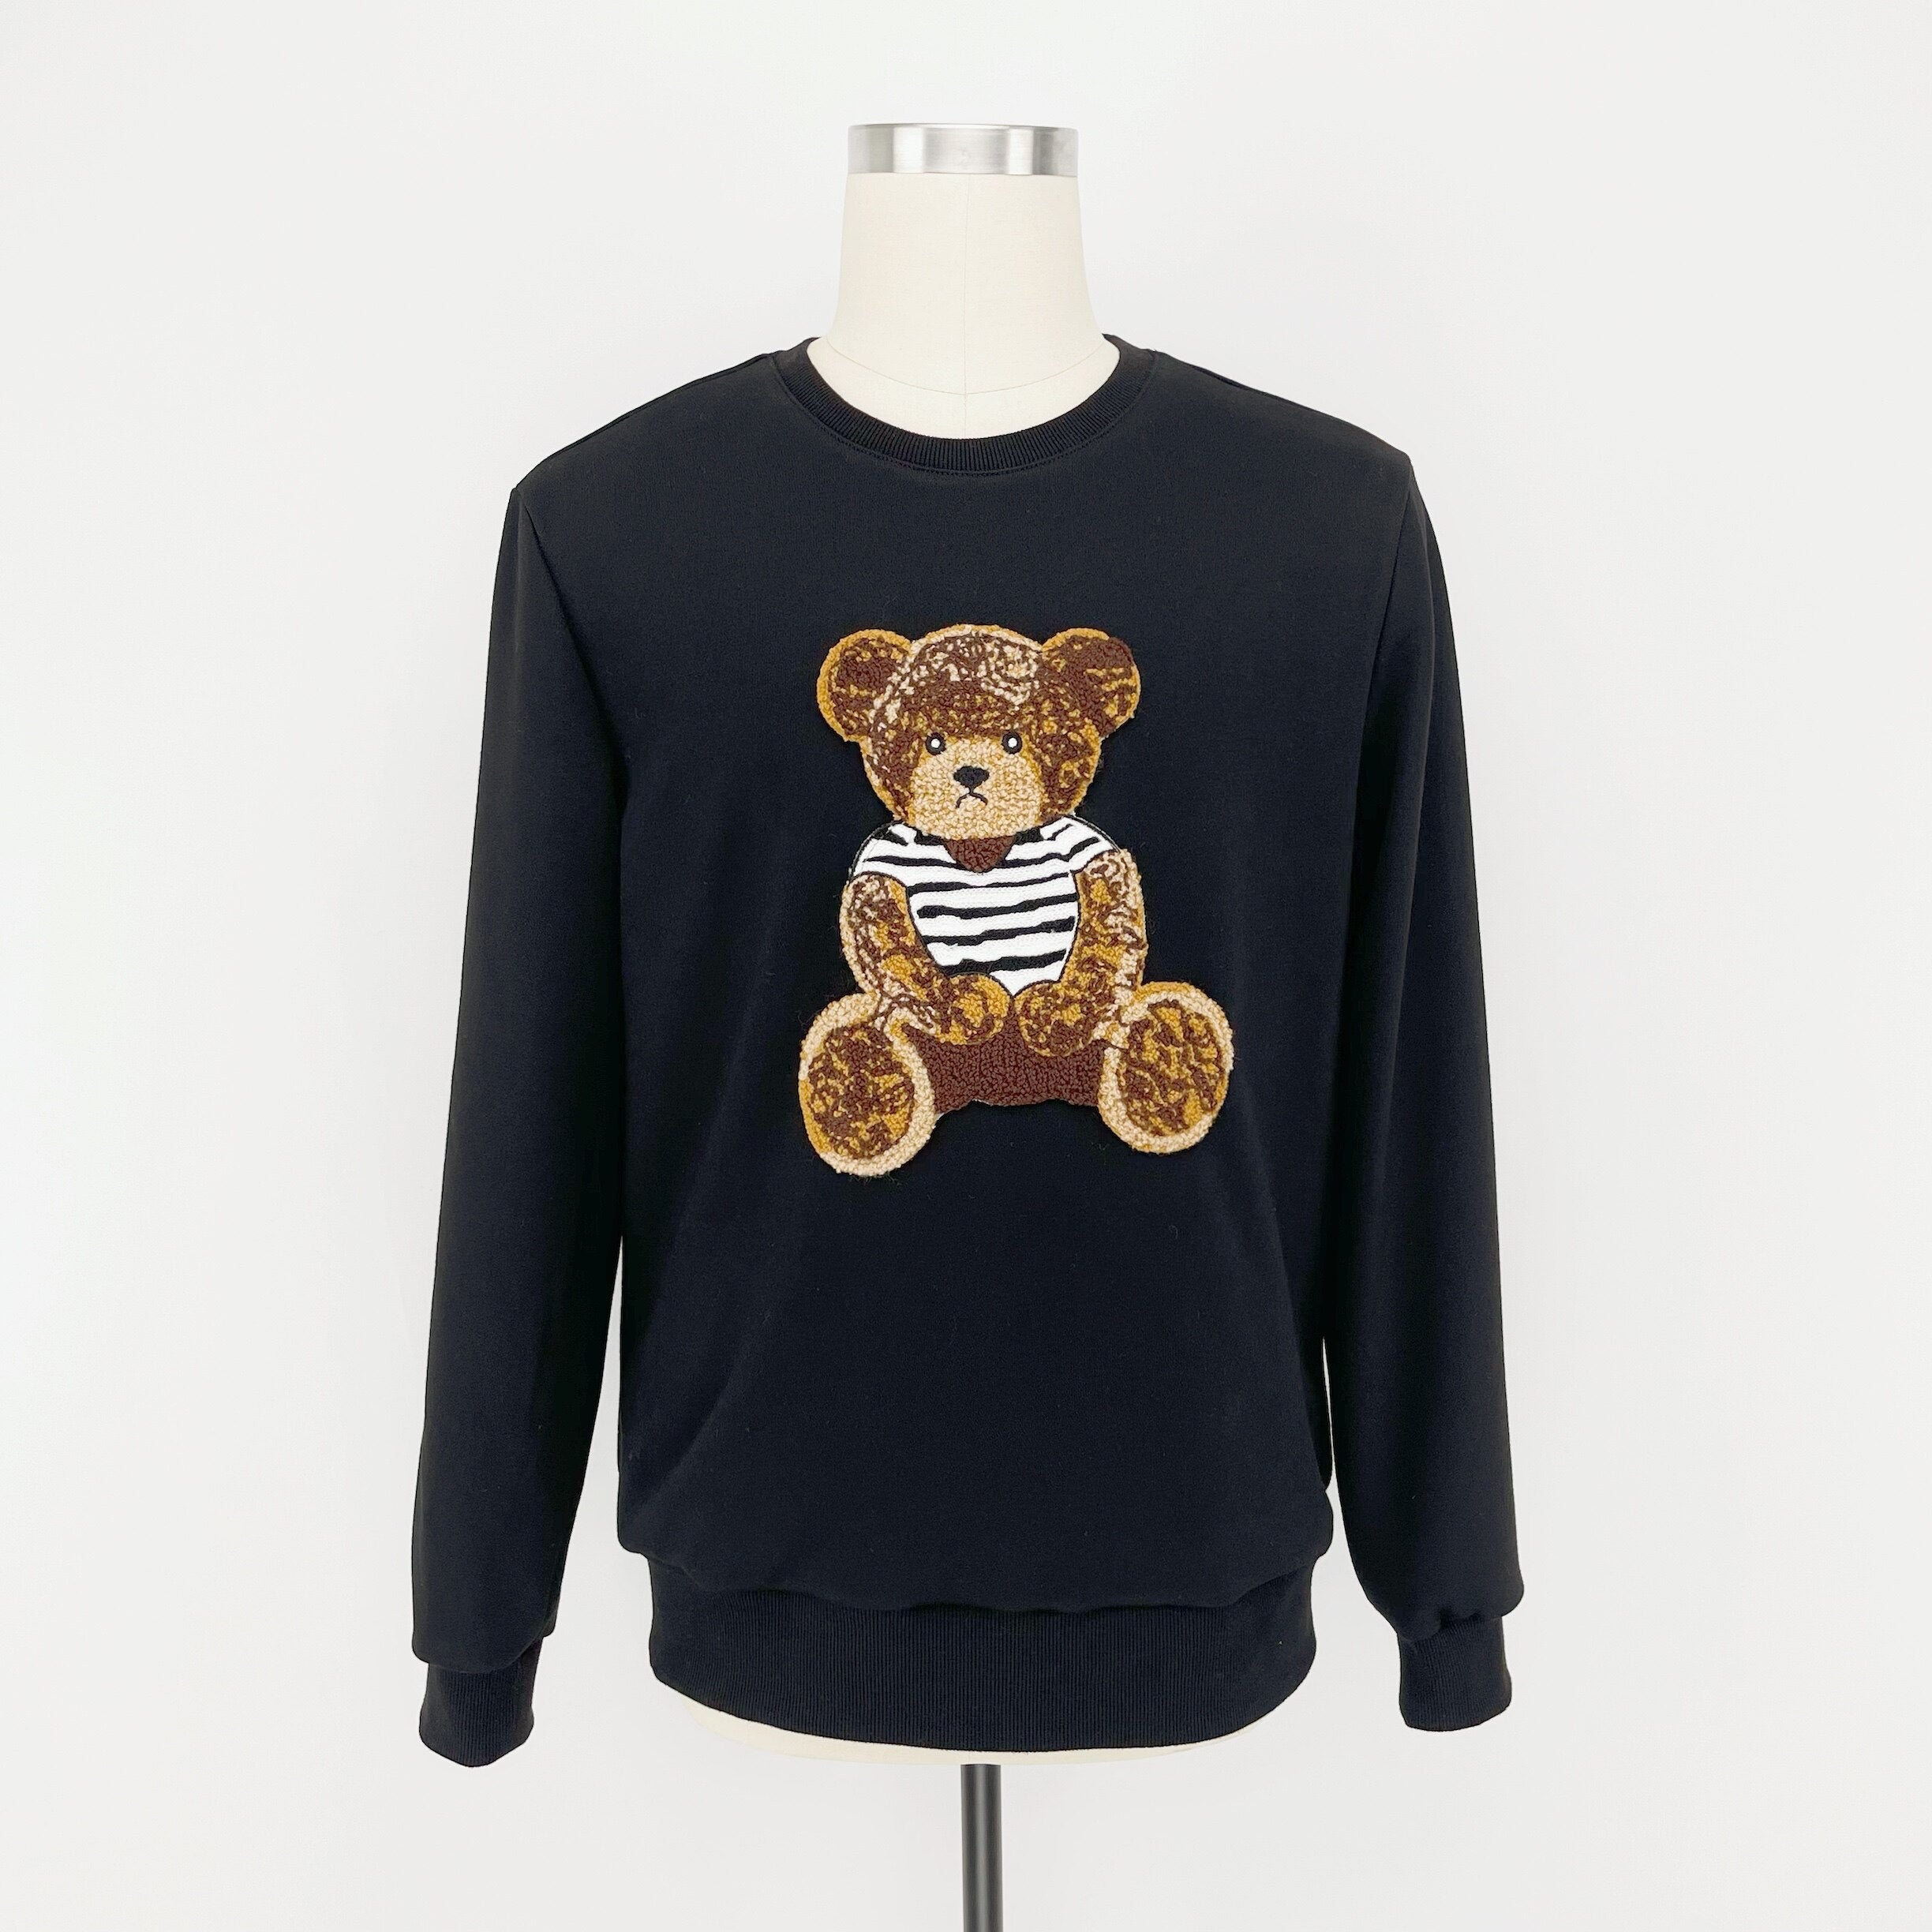 Family Matching Bear Embroidery Sweatshirt Pullover